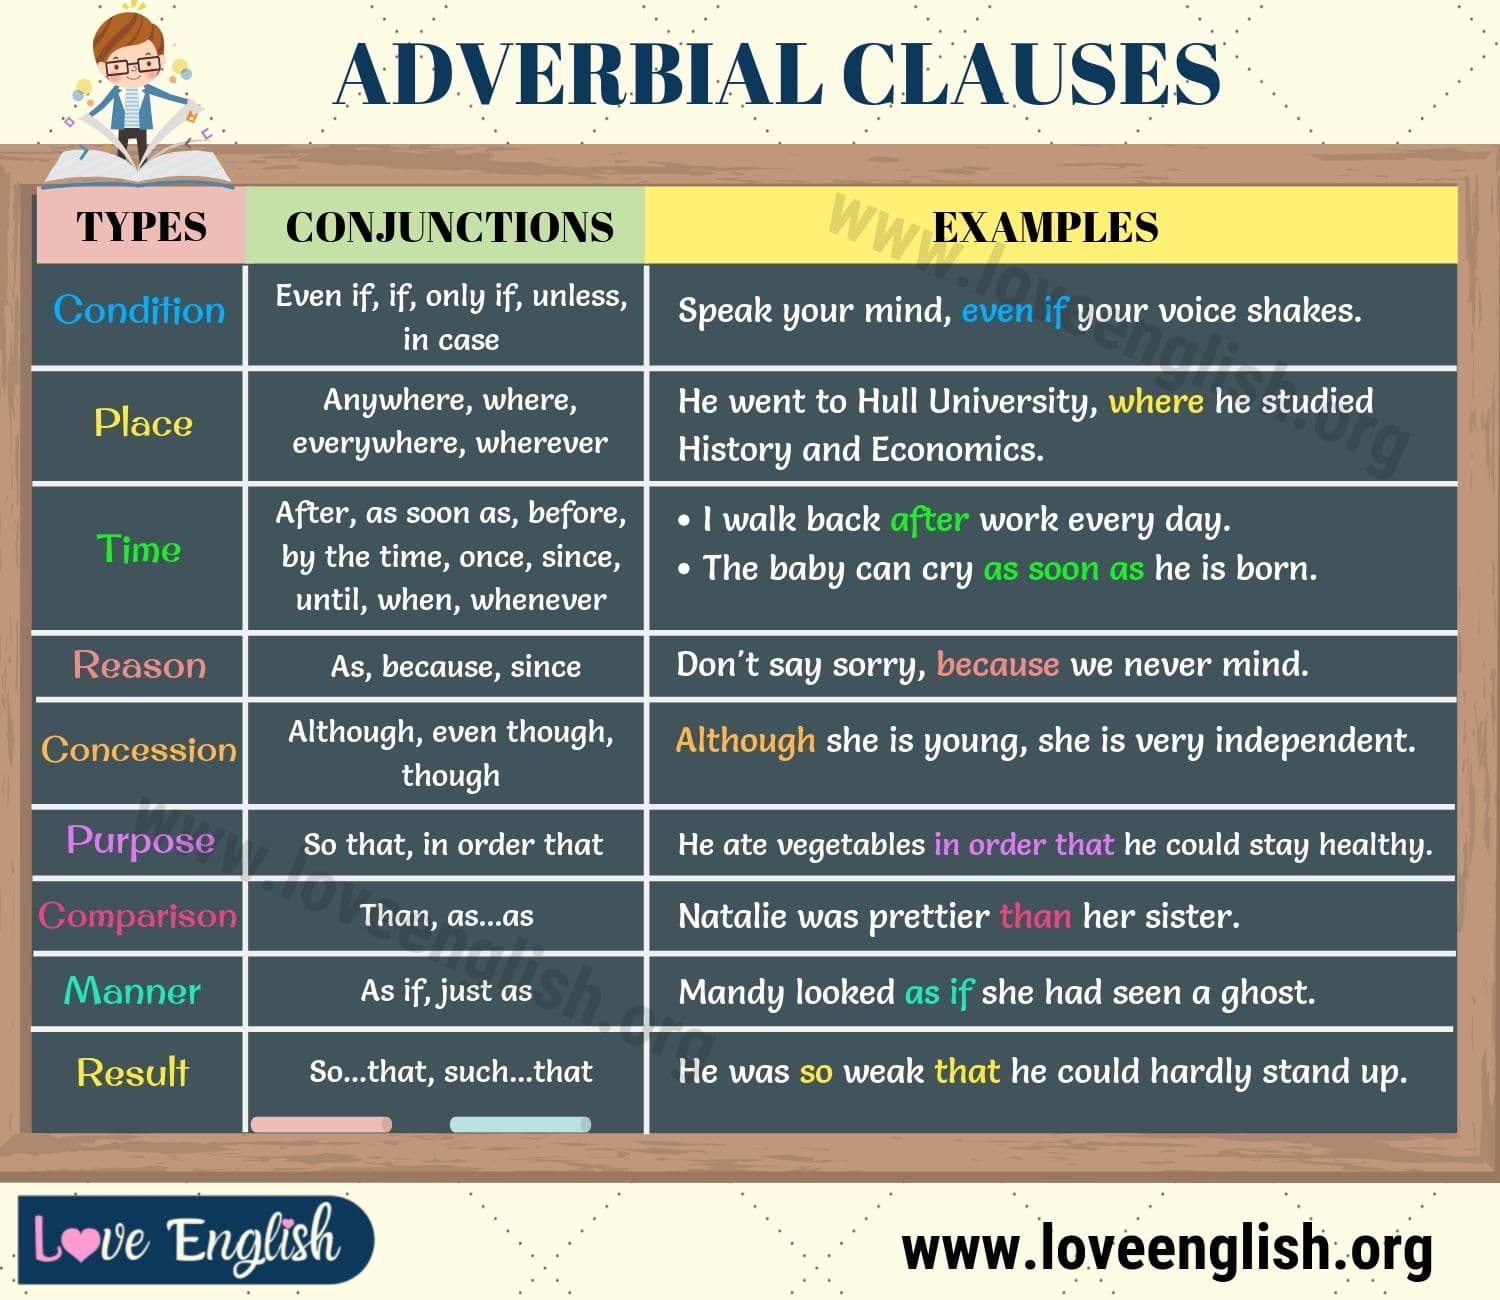 Time adjectives. Adverb Clauses в английском языке. Adverbial Clauses в английском языке. Types of Clauses в английском. Types of Clauses примеры.